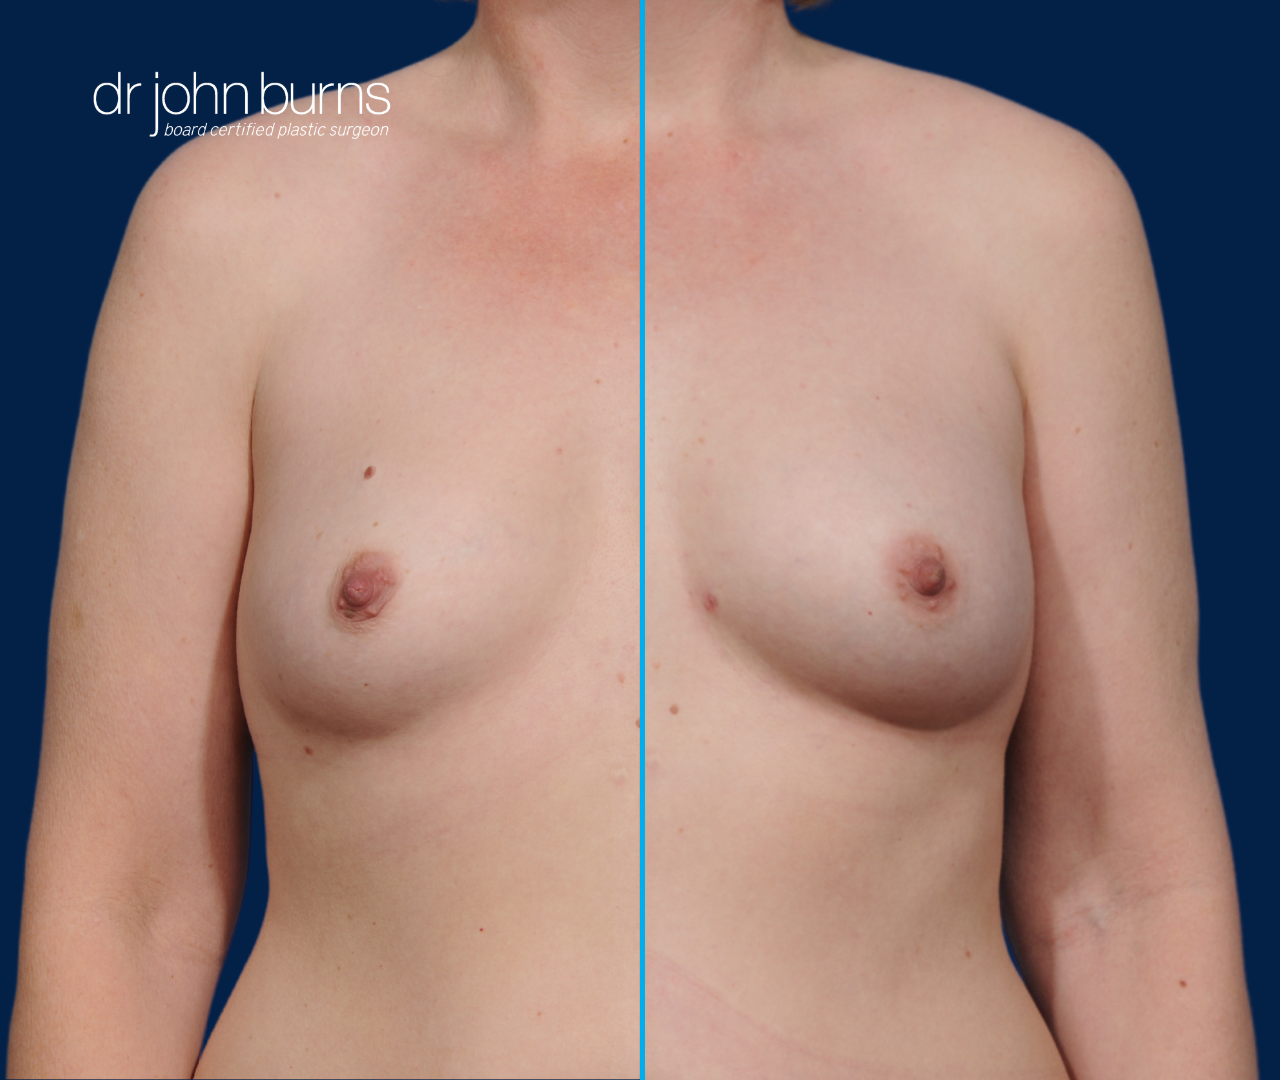 case 5- split screen before & after fat transfer to breast by top plastic surgeon, Dr. John Burns